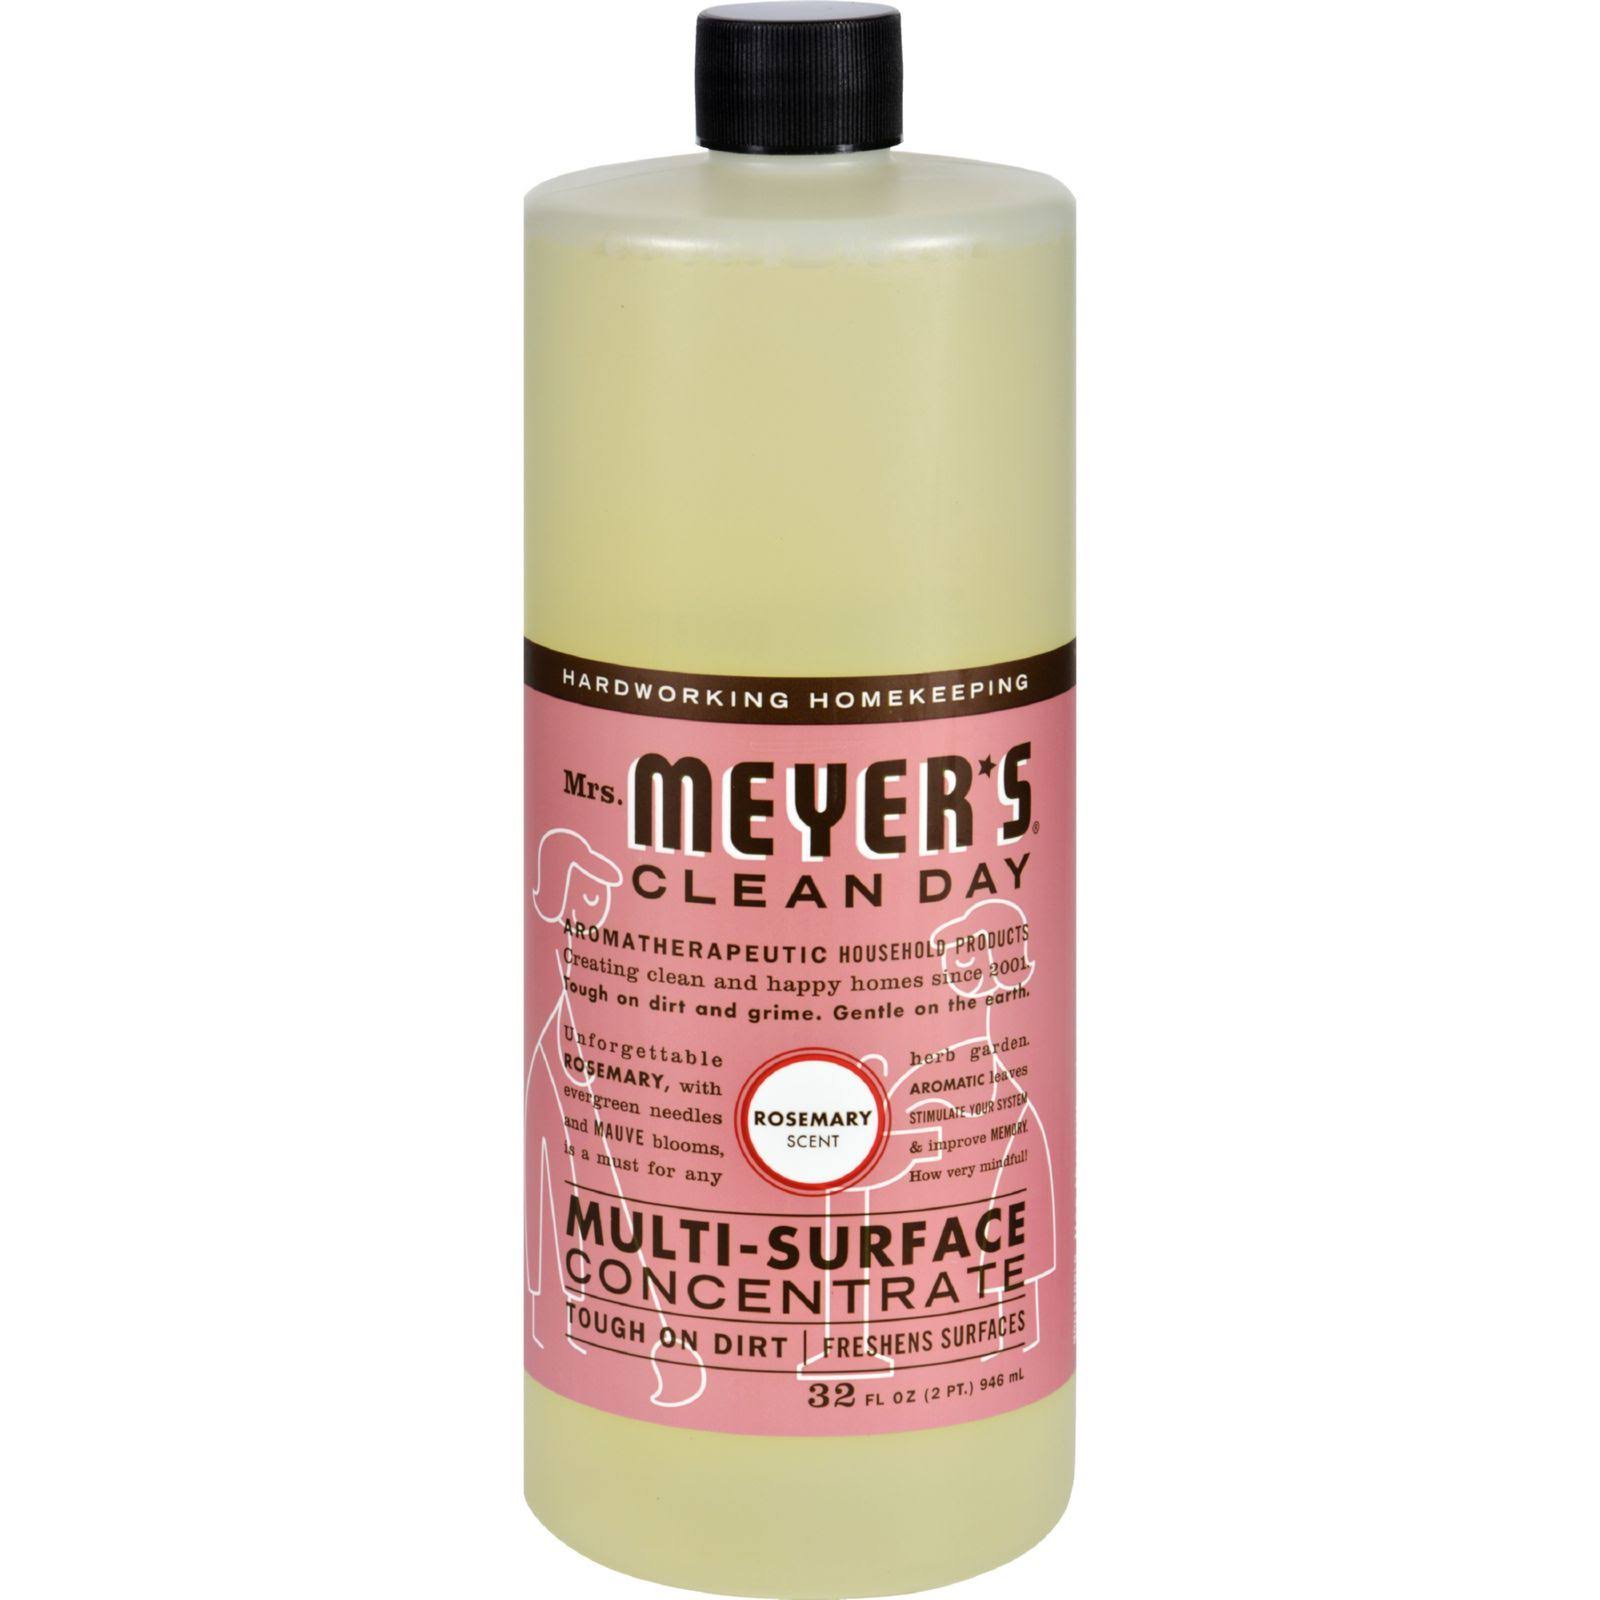 Mrs Meyers Clean Day Multi Surface Concentrate Cleaner - Rosemary, 32oz